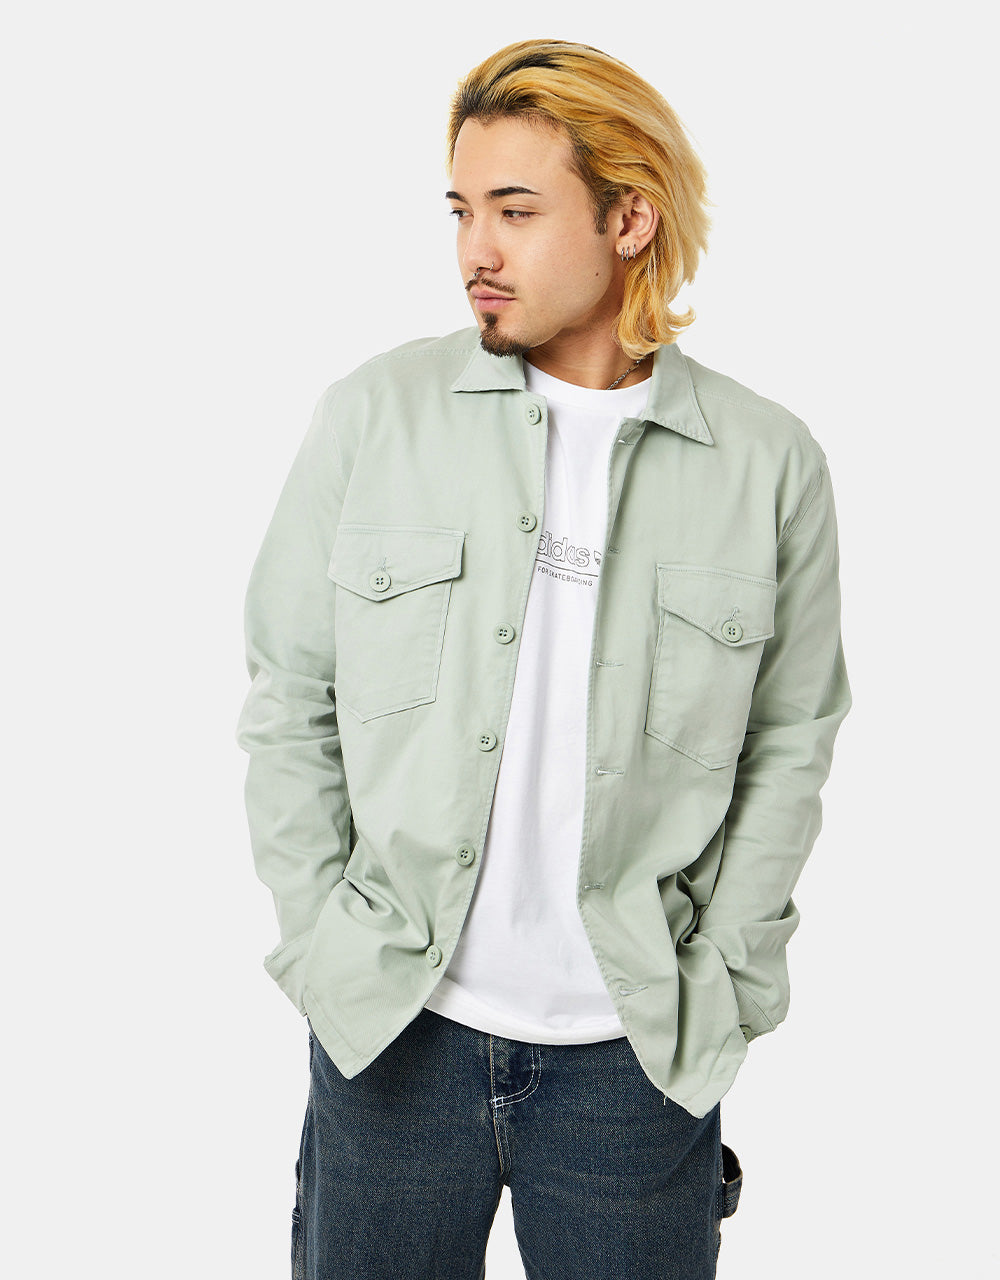 Route One Military Shirt - Dusty Mint